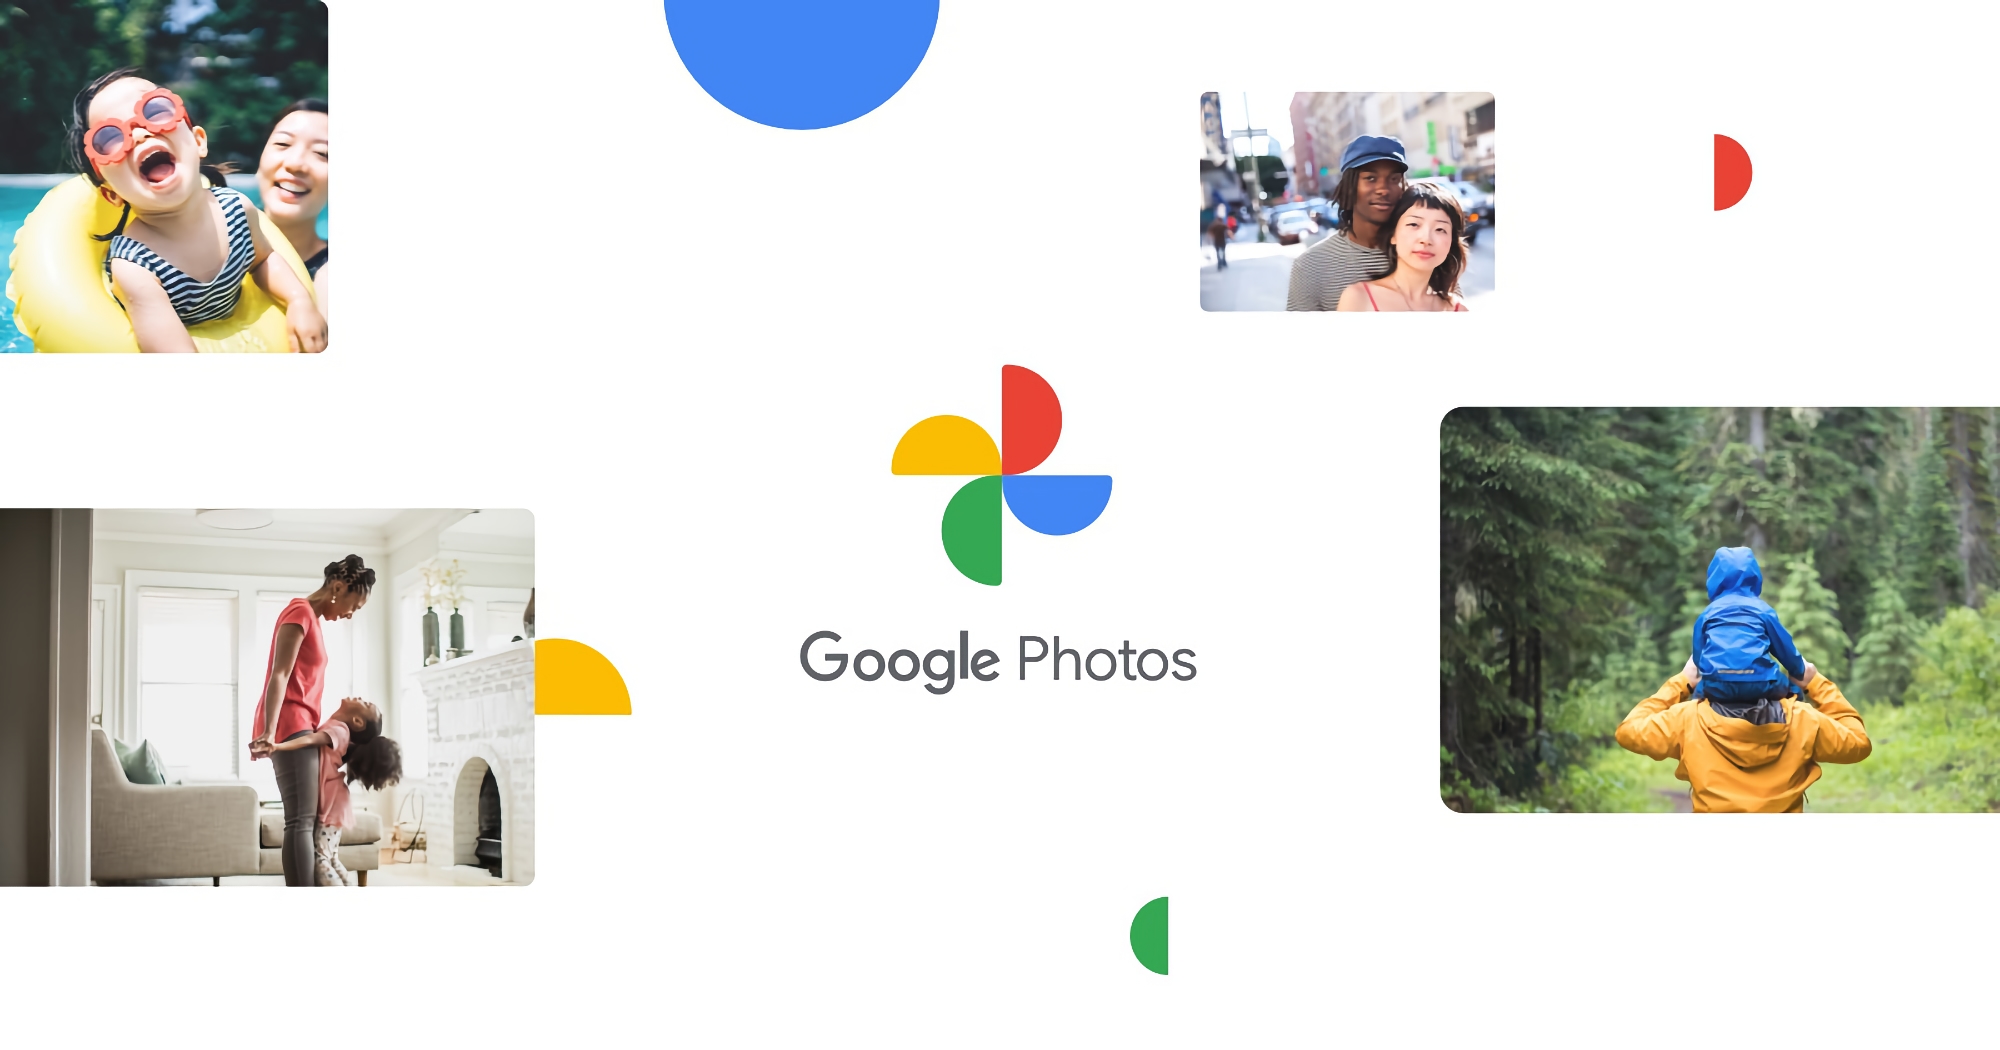 Google Photos got a major update: a new Memories section and an improved collage editor